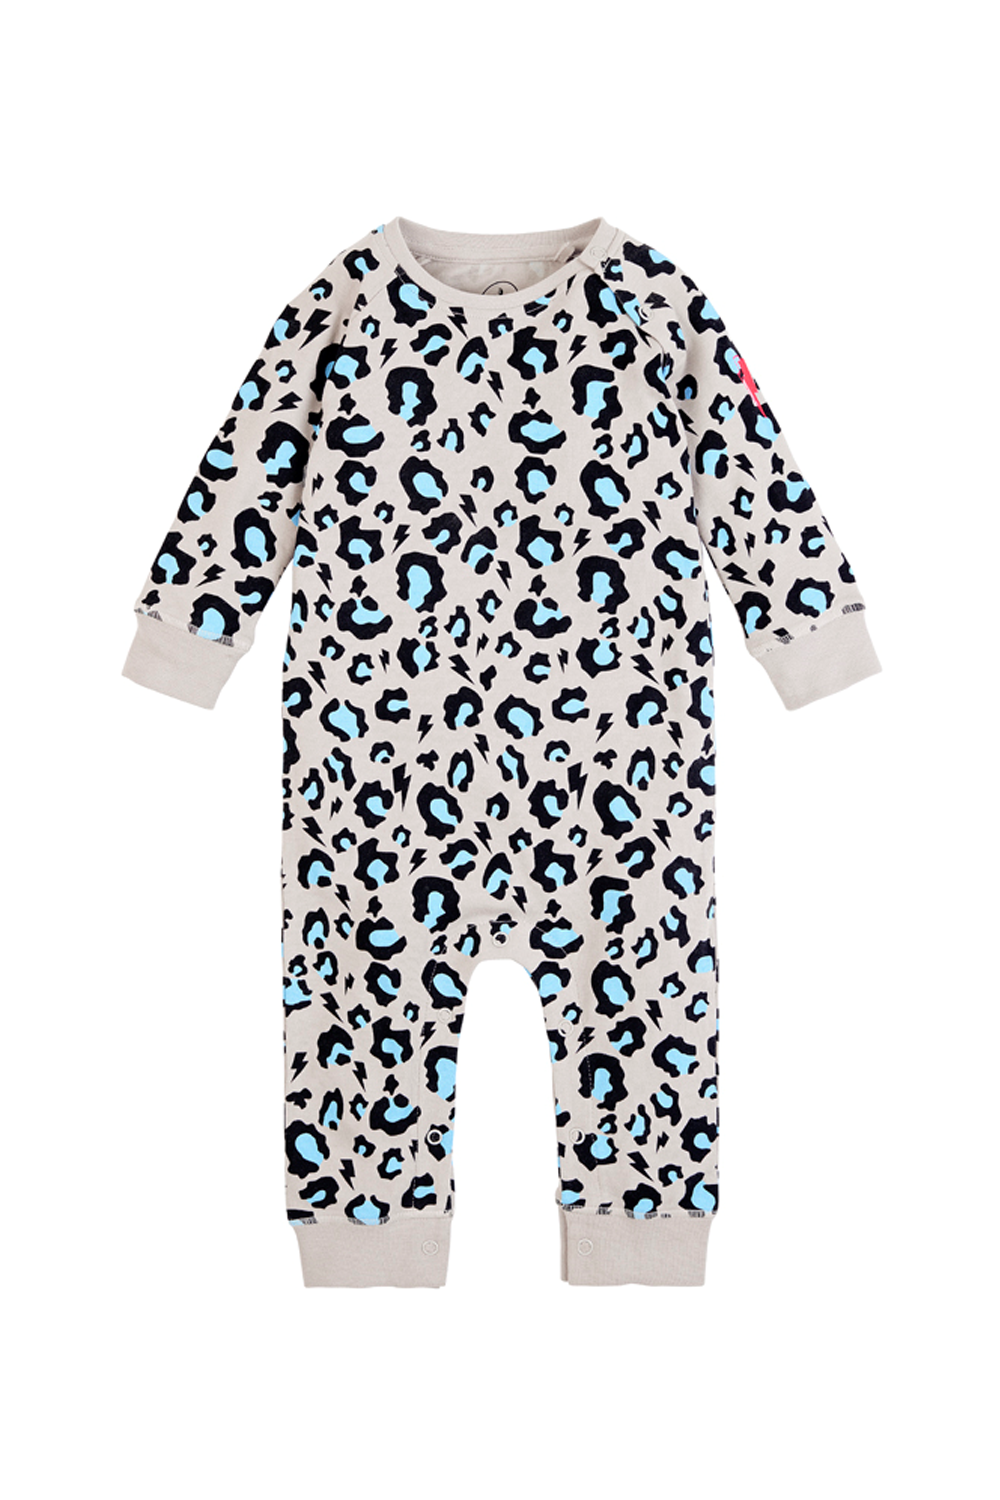 Grey with Blue and Black Snow Leopard Romper